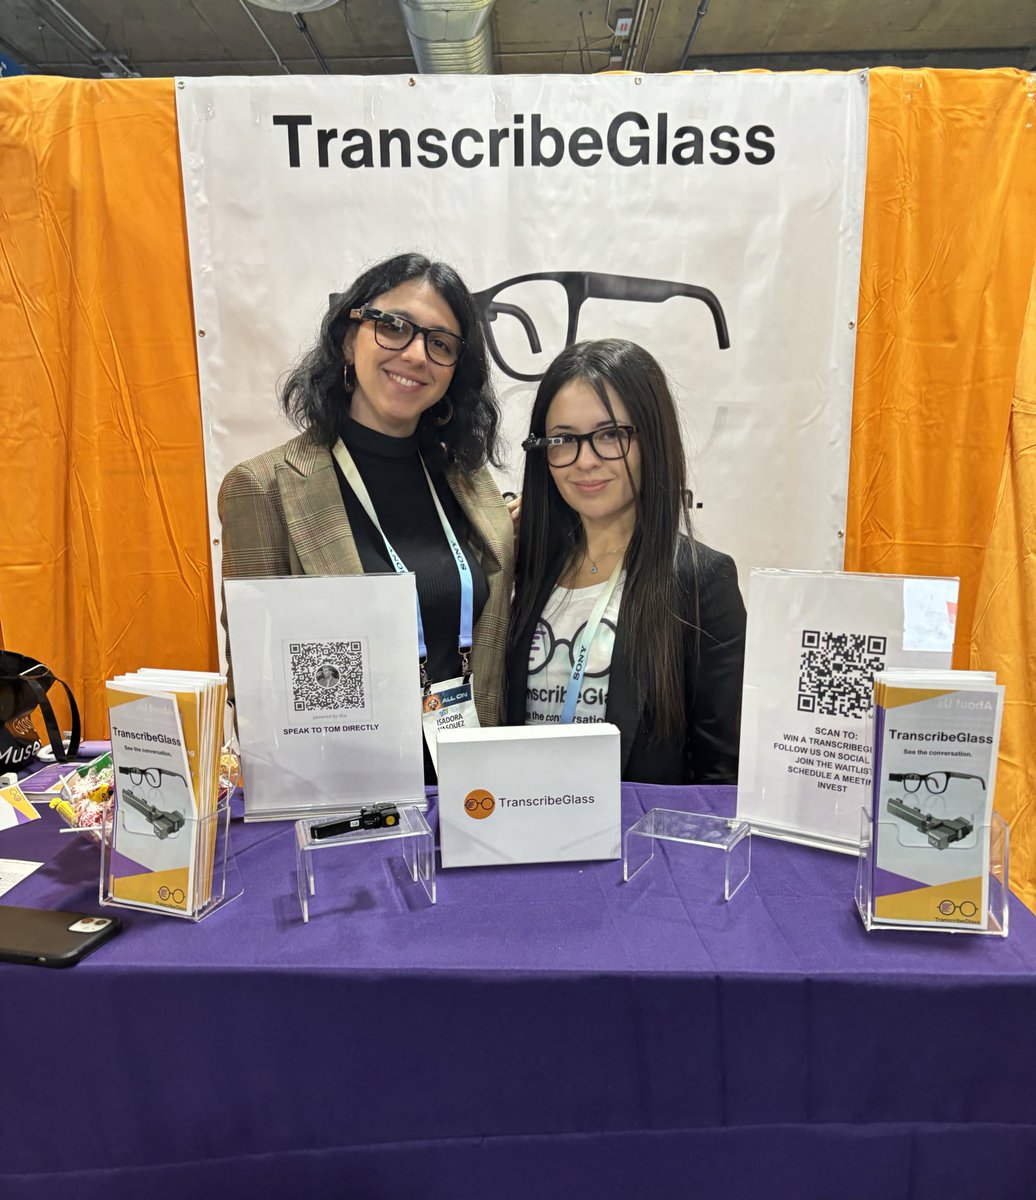 We’d like the extend our sincerest thanks to each and every one of you who stopped by at  #CES2024 and followed along on social media– your support means everything. This marks a huge milestone for TranscribeGlass, as it was our first year at the world’s largest tech conference.